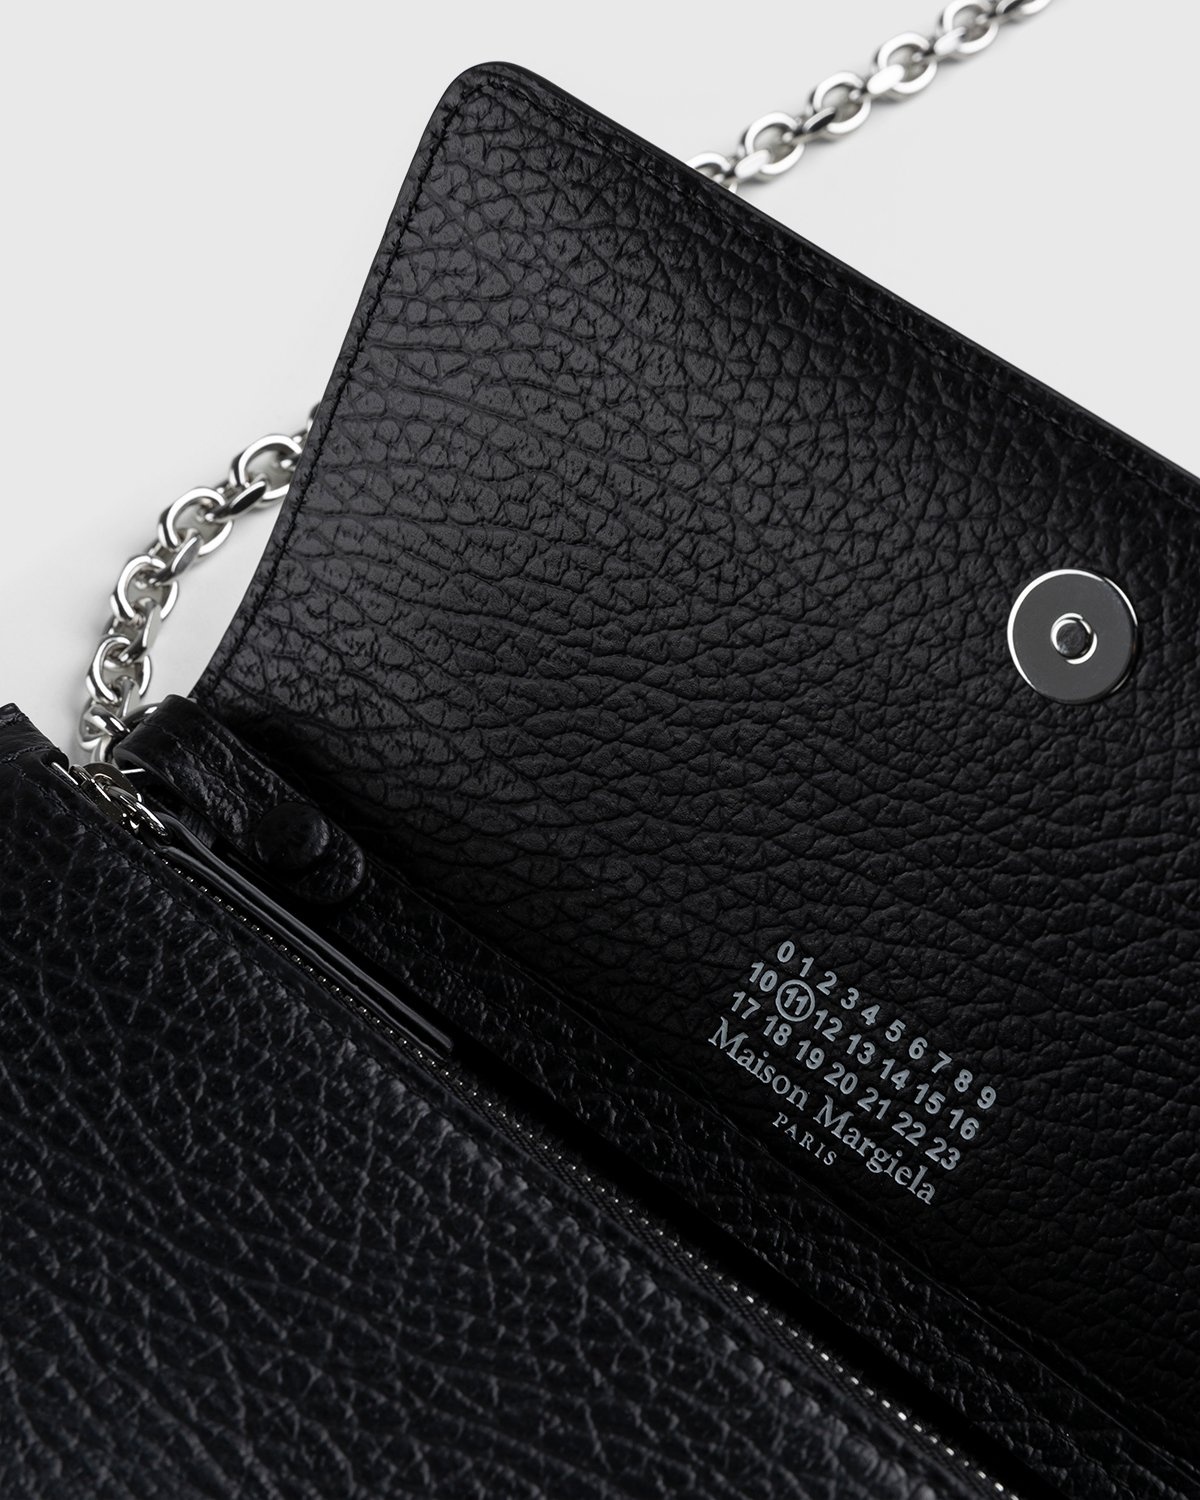 Maison Margiela – Leather Wallet With Chain Black | Highsnobiety Shop